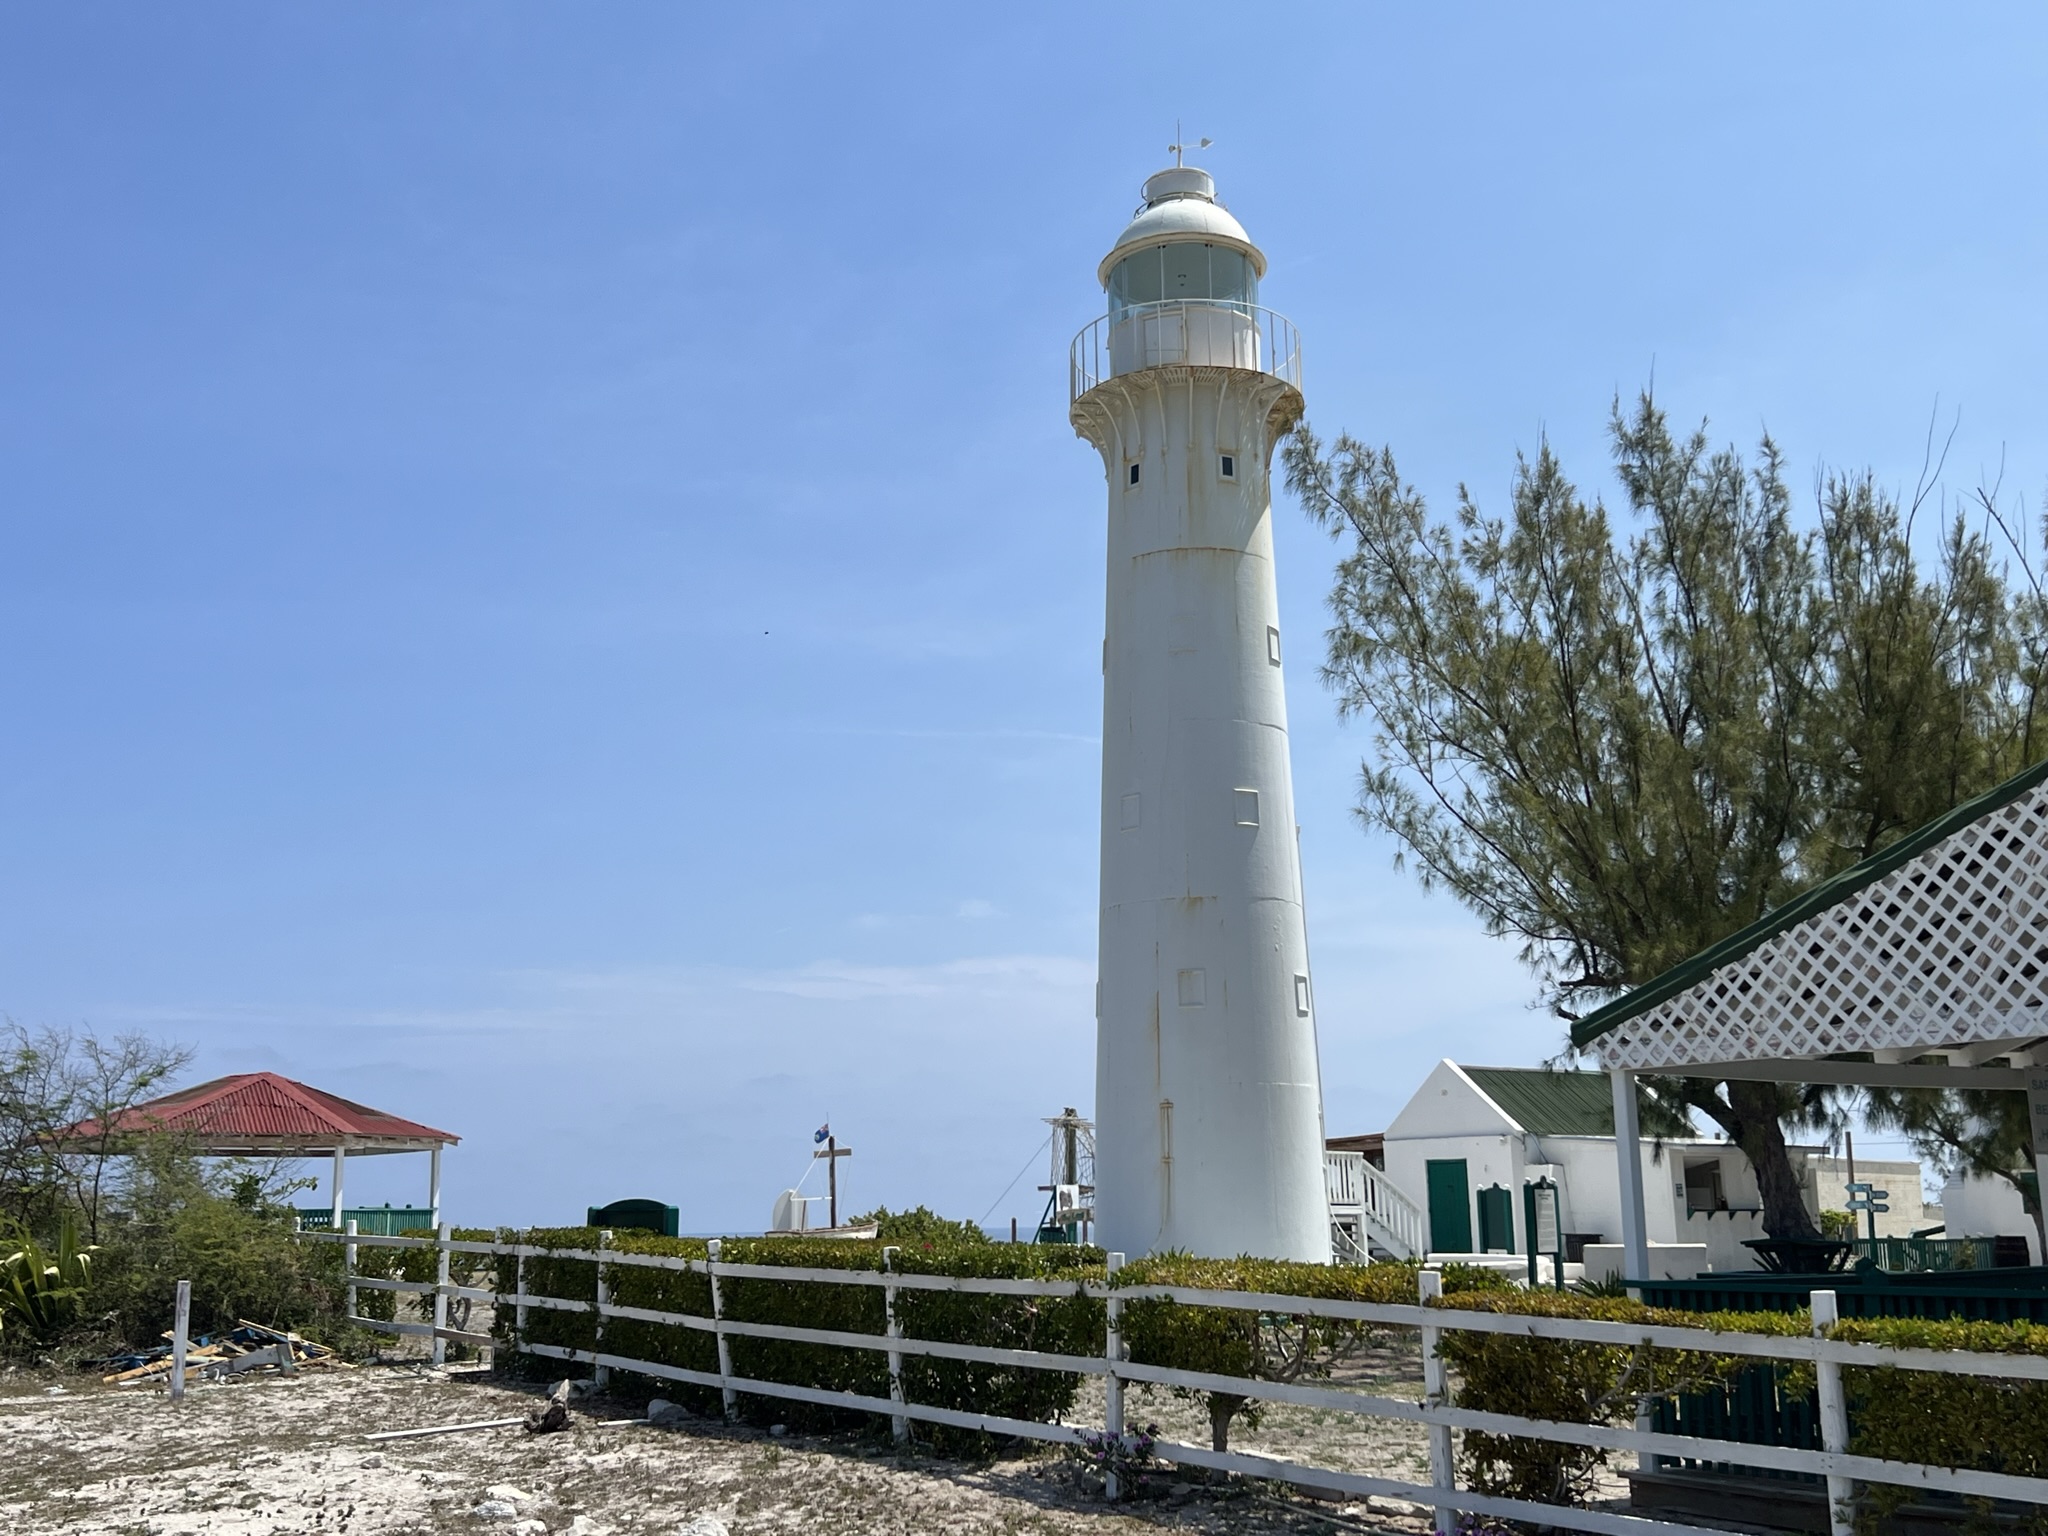 Cruise Excursion Shorts – Island Tram Tour of Historic Areas of Grand Turk Island in Turks & Caicos